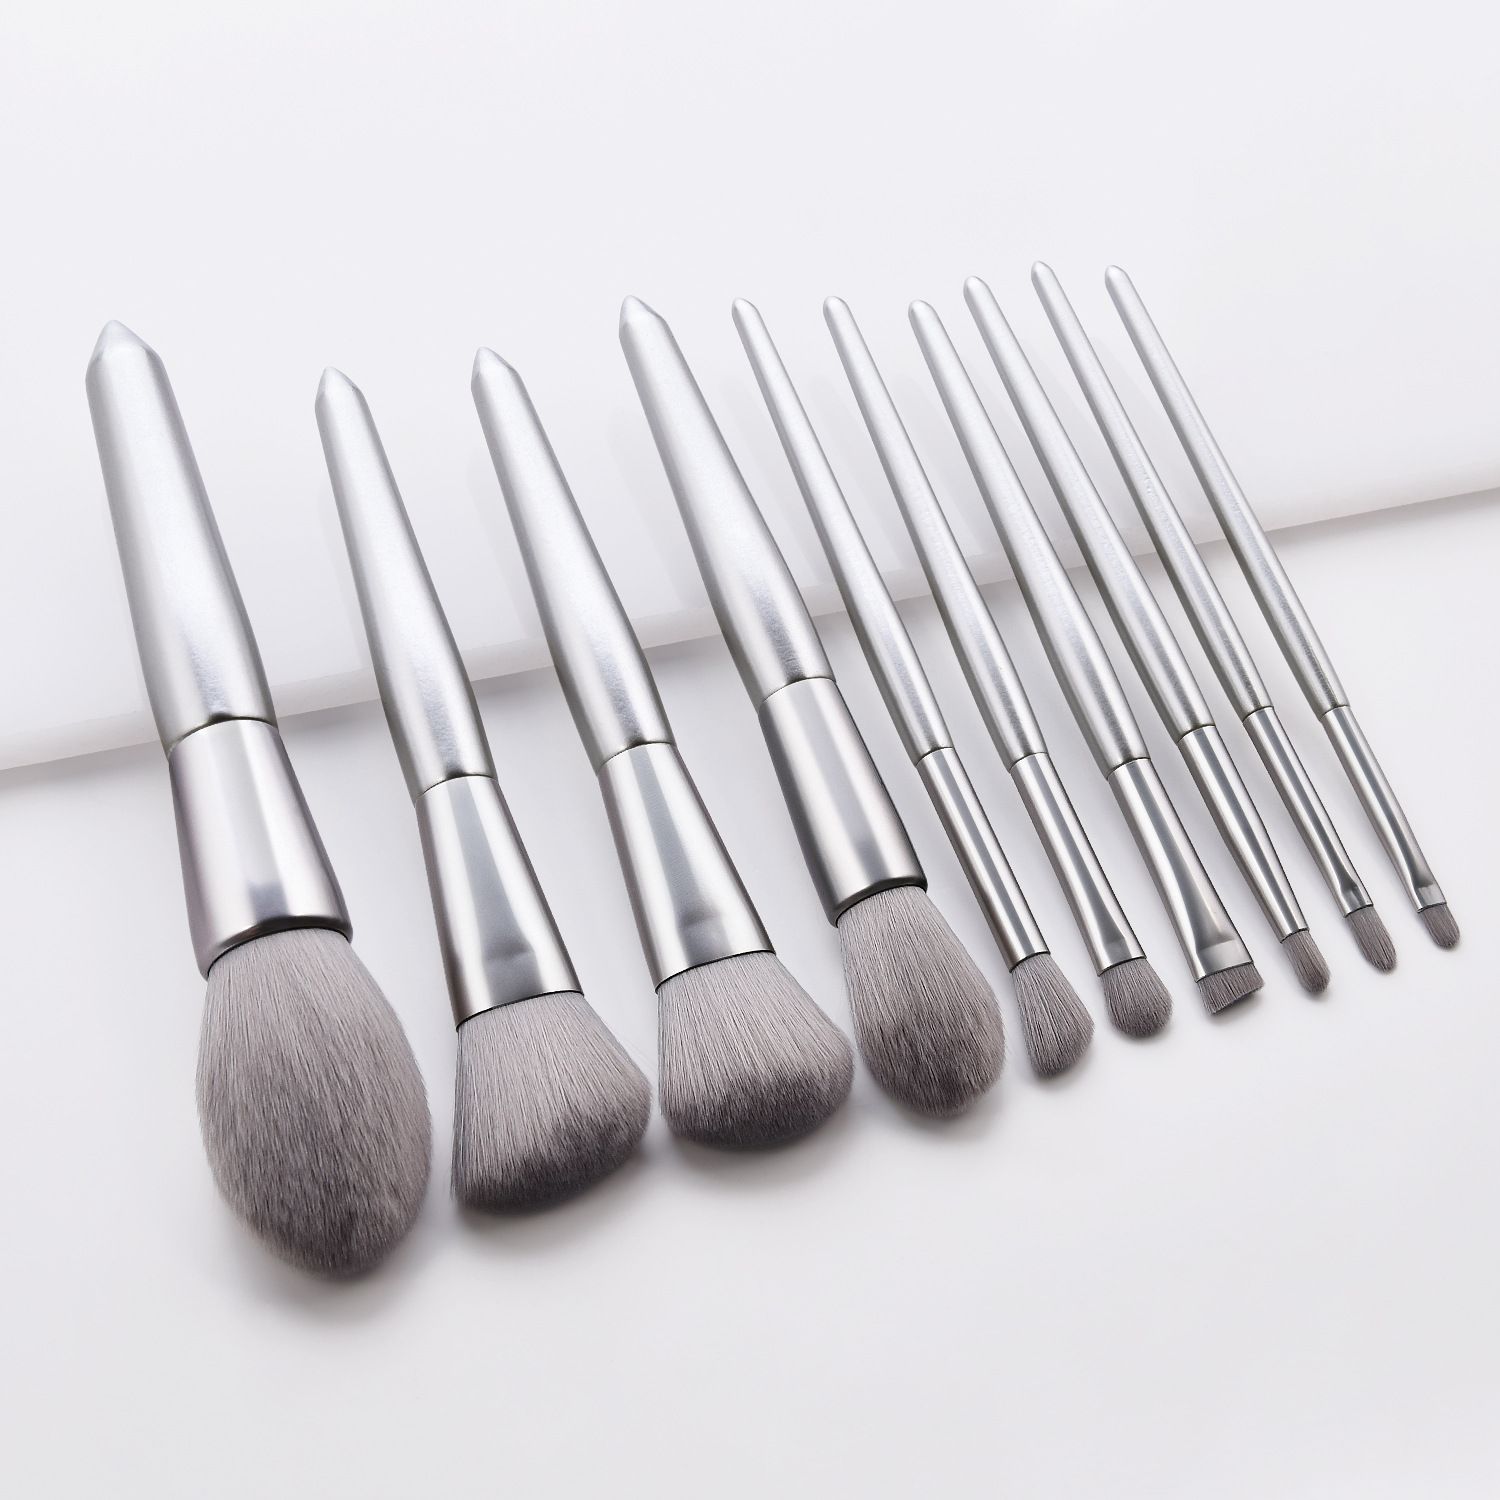 Professional Makeup Tools & Accessories Silver Make Up Brushes Set Loose Powder Eye Shadow Blush Cosmetics Soft Nylon Free From Bettermall, $7.32 | DHgate.Com